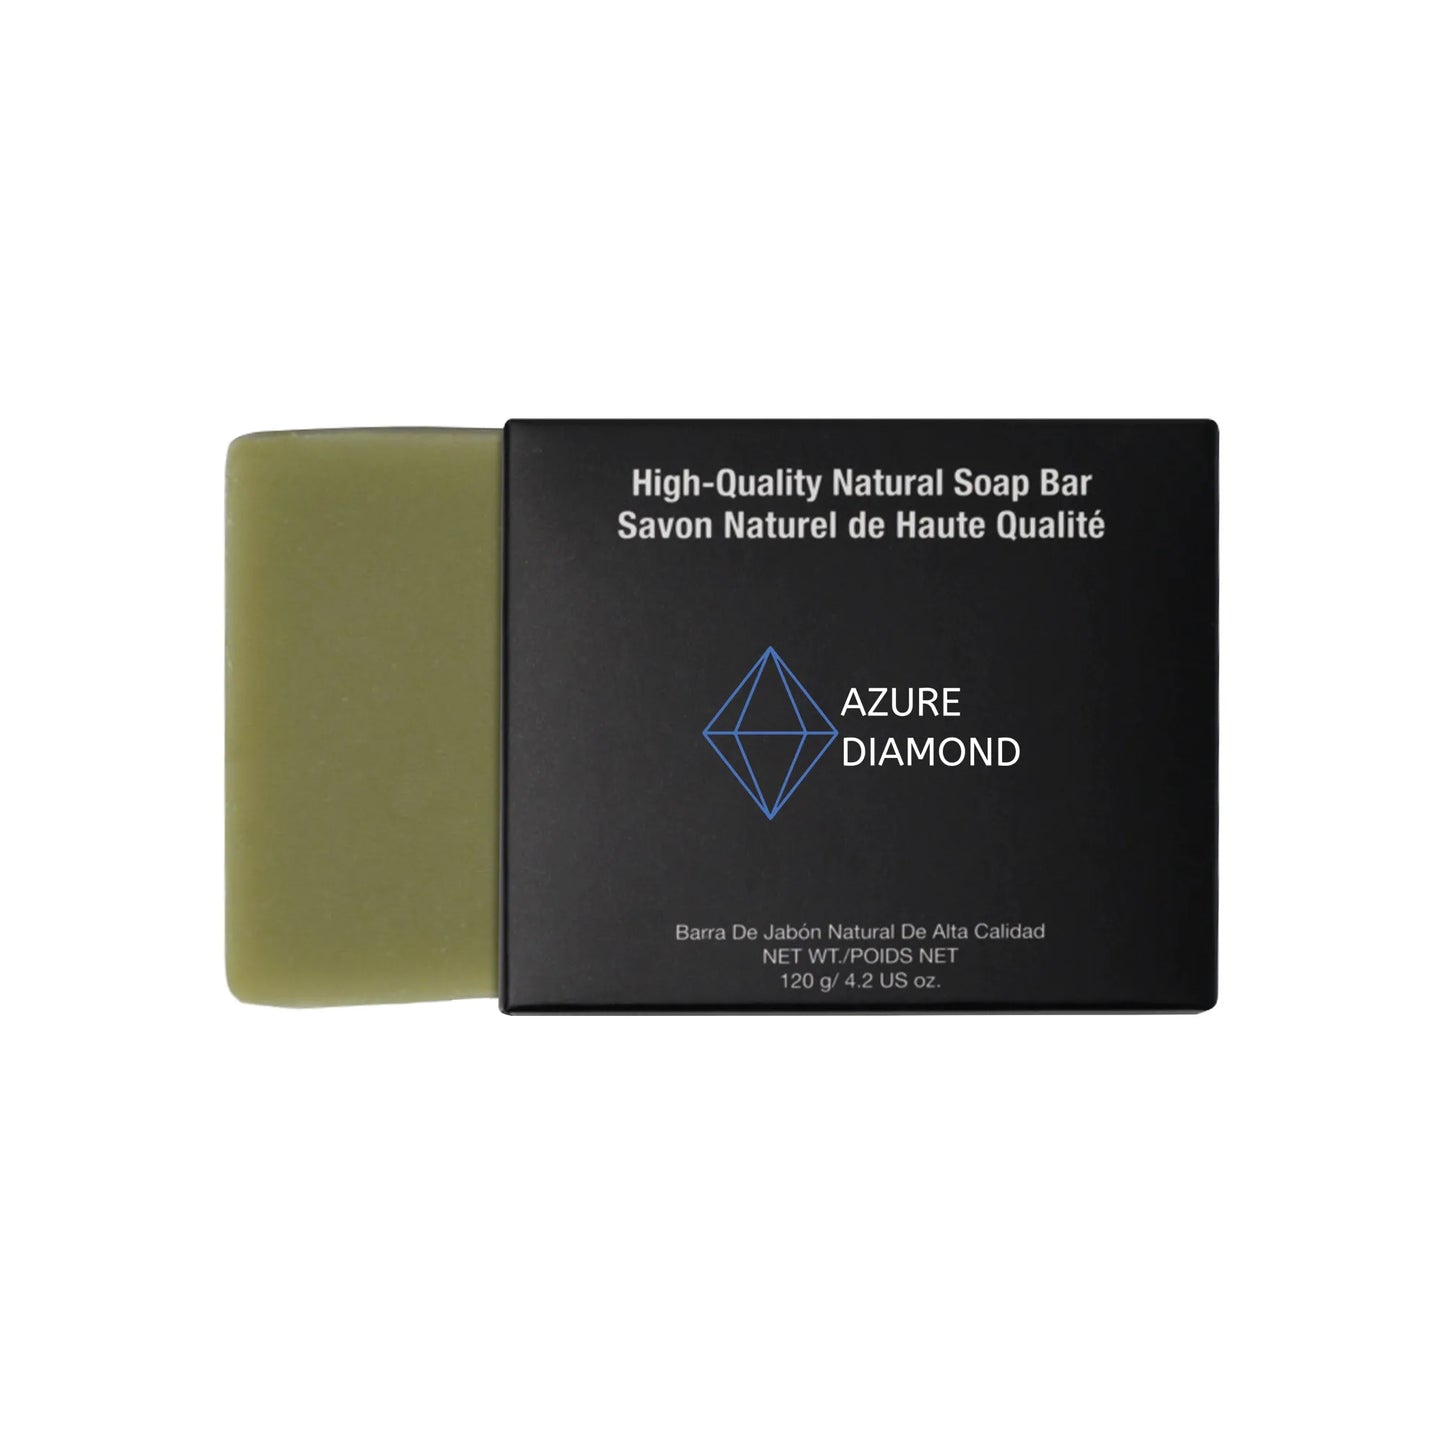 Natural Aloe Rich Soothing Soap